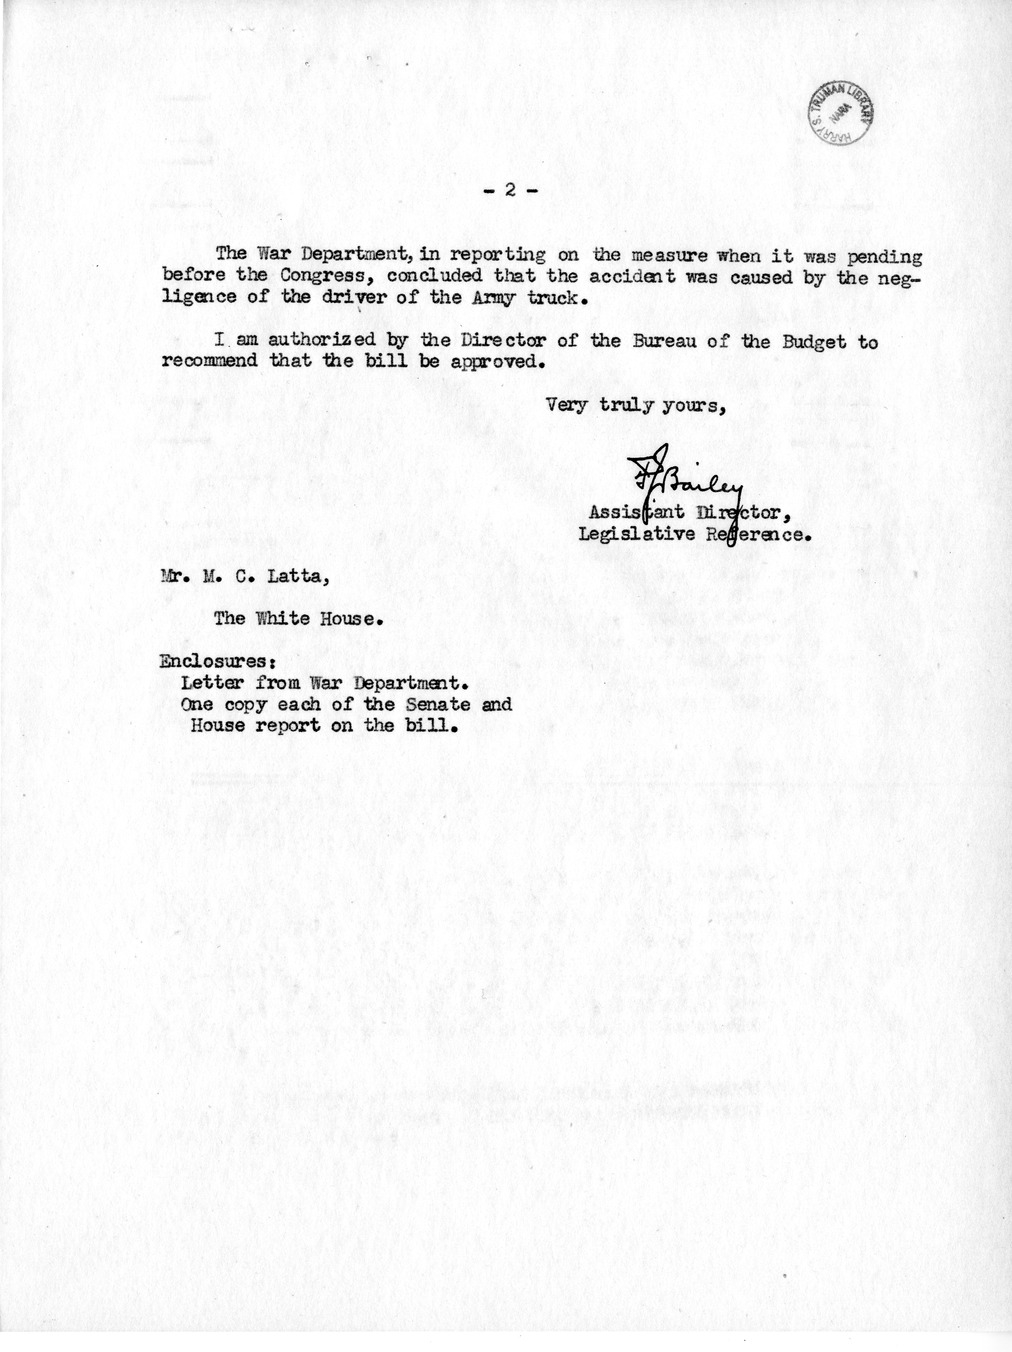 Memorandum from Frederick J. Bailey to M. C. Latta, H.R. 2762, For the Relief of Mrs. Bessie M. Campbell and Charles J. Campbell, with Attachments